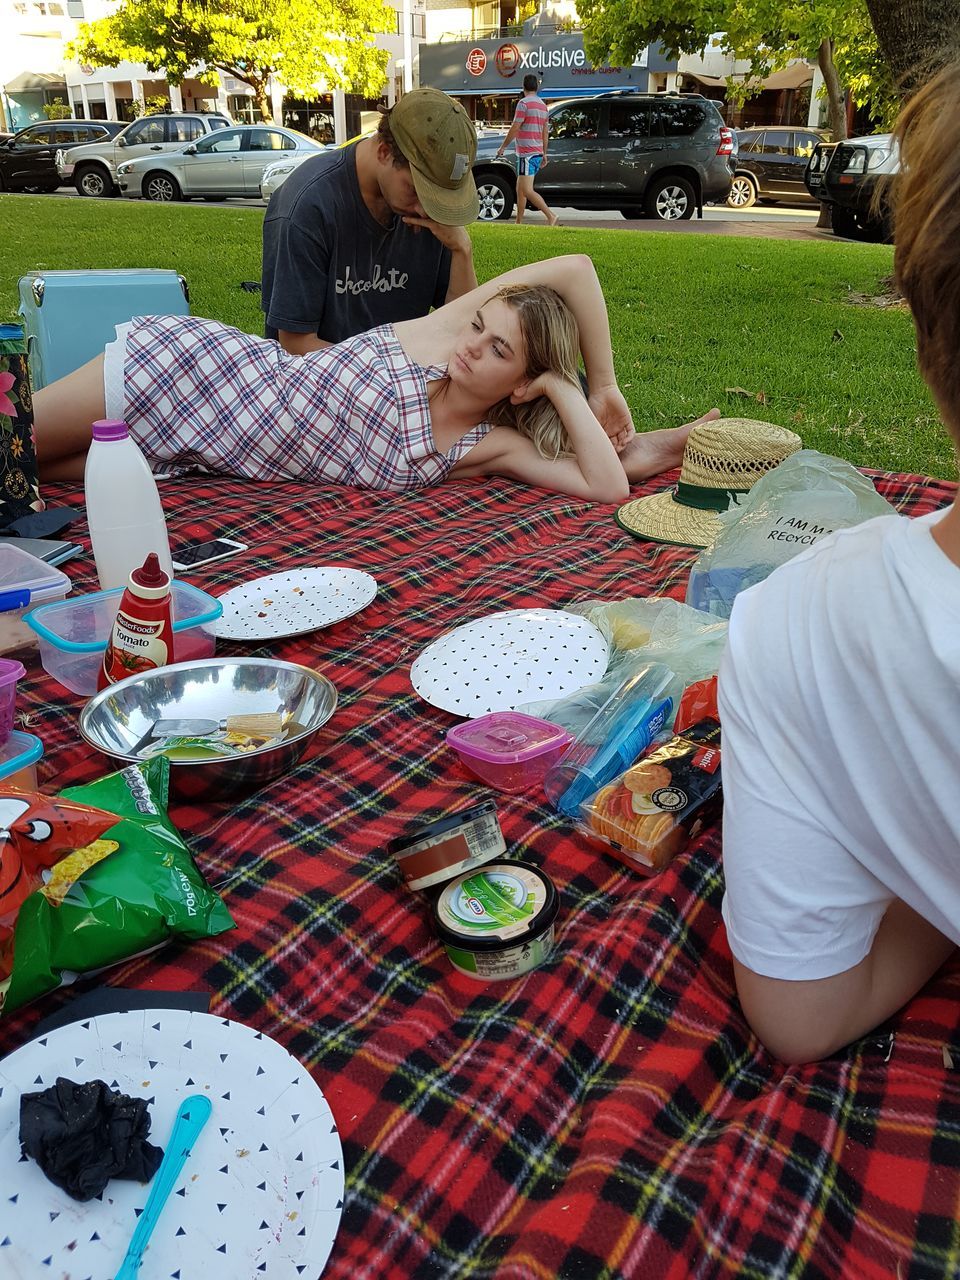 child, females, girls, togetherness, sitting, males, childhood, lying down, leisure activity, summer, picnic blanket, women, people, bonding, full length, two people, outdoors, day, picnic, adult, close-up